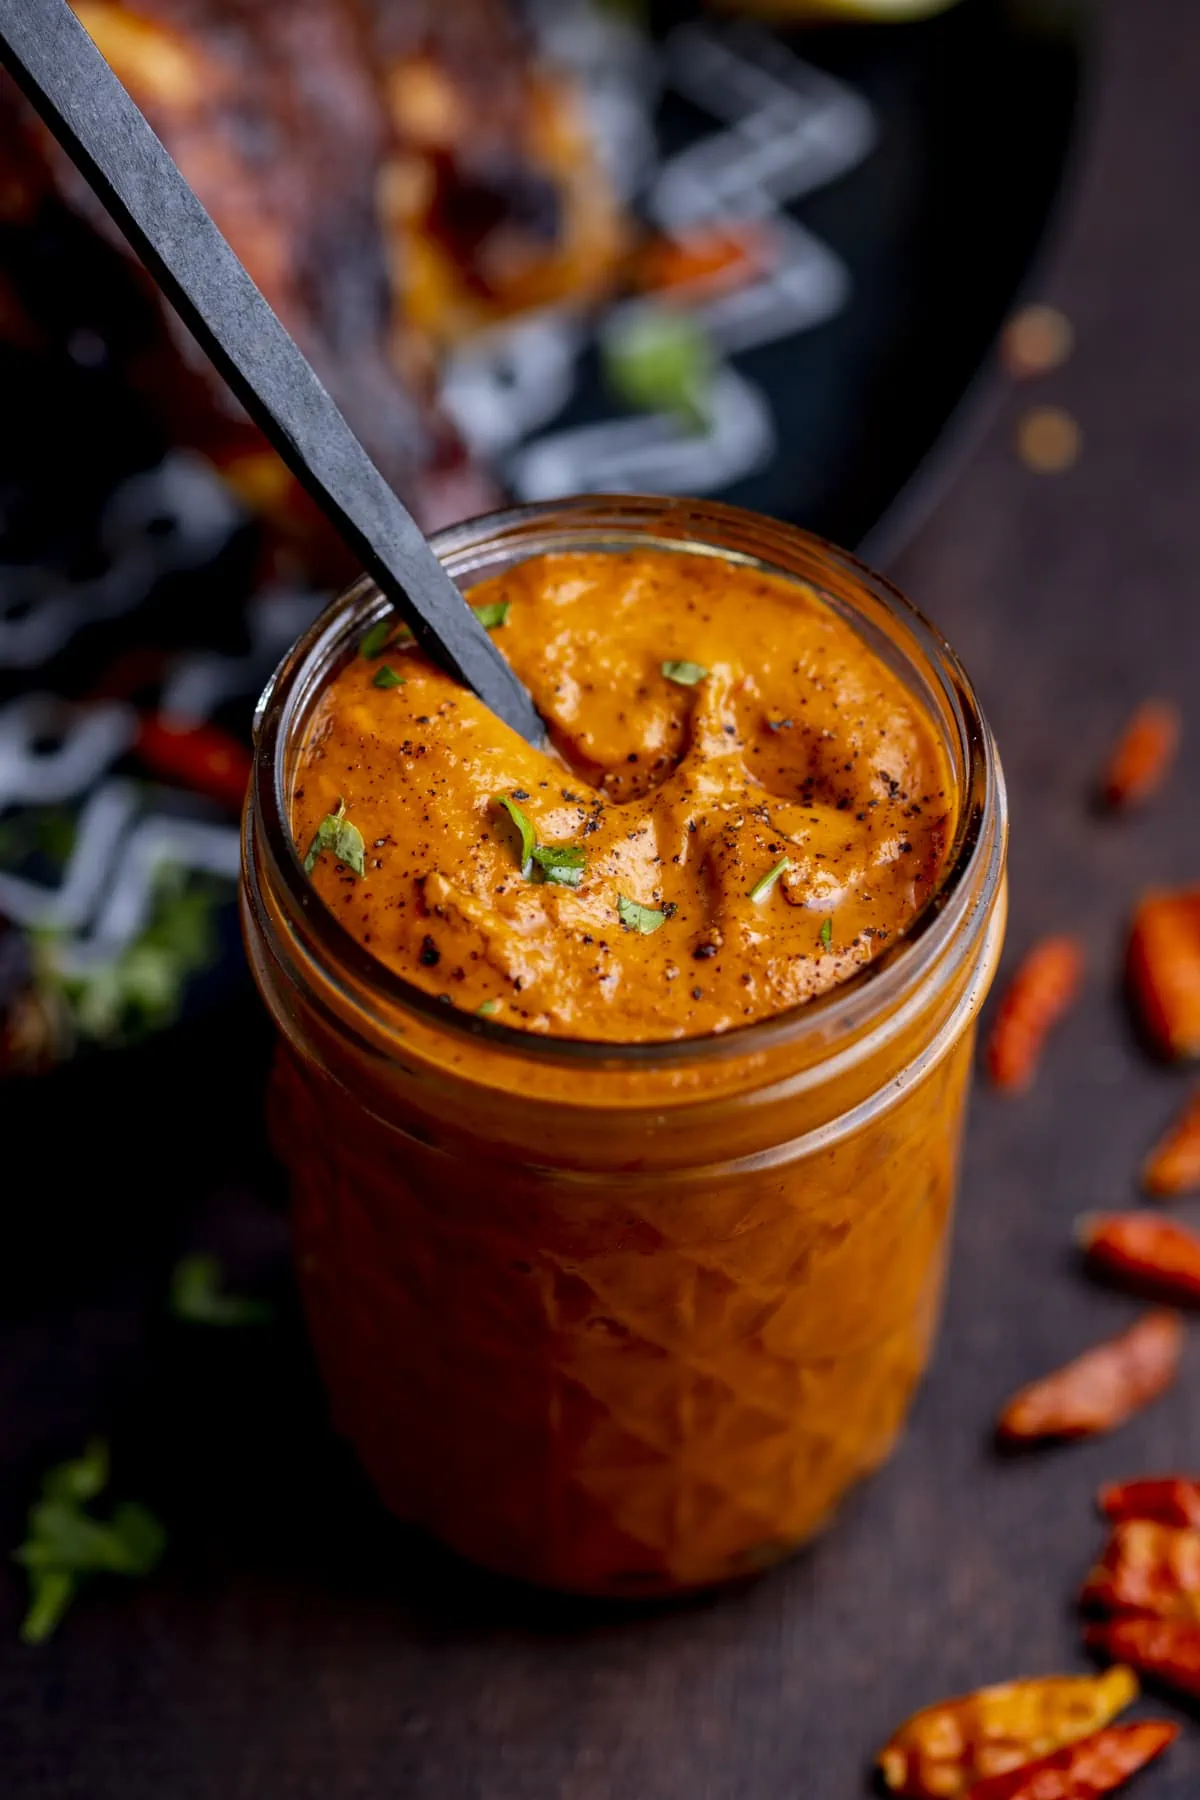 Homemade peri peri sauce in a glass jar with a black spoon sticking out of it.